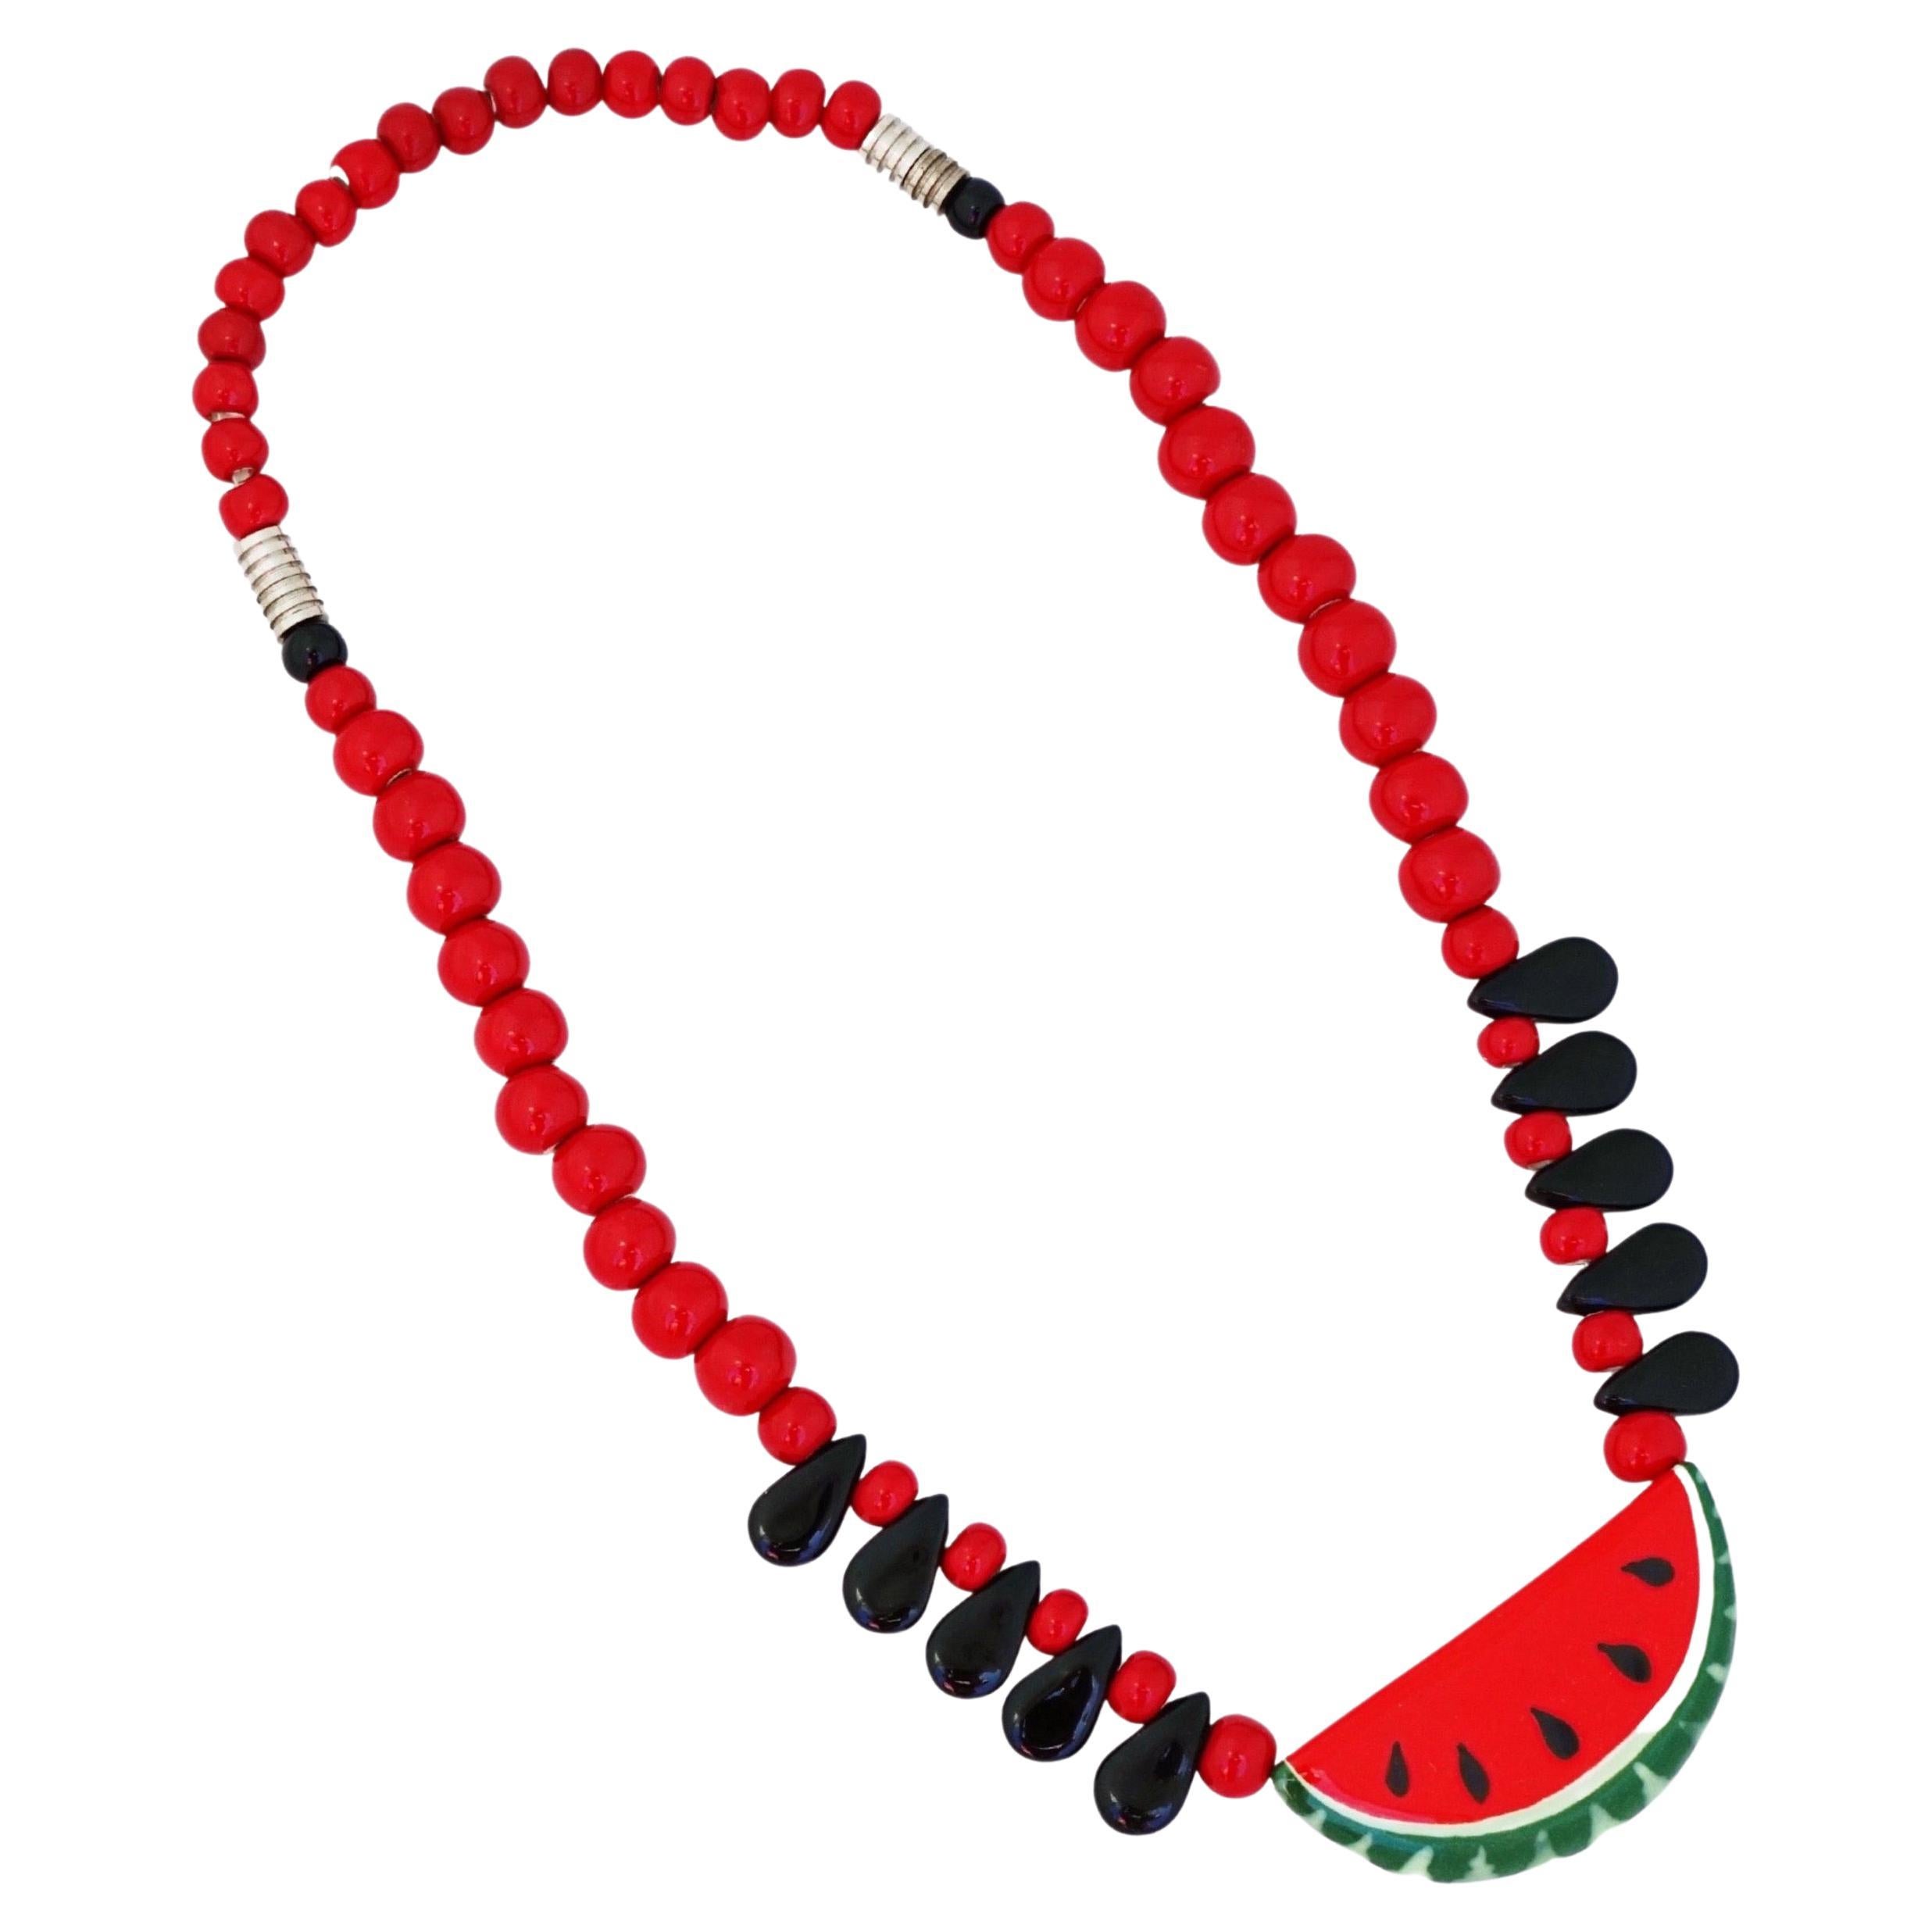 Handmade Ceramic Beaded Watermelon Necklace By Flying Colors, 1980s For Sale